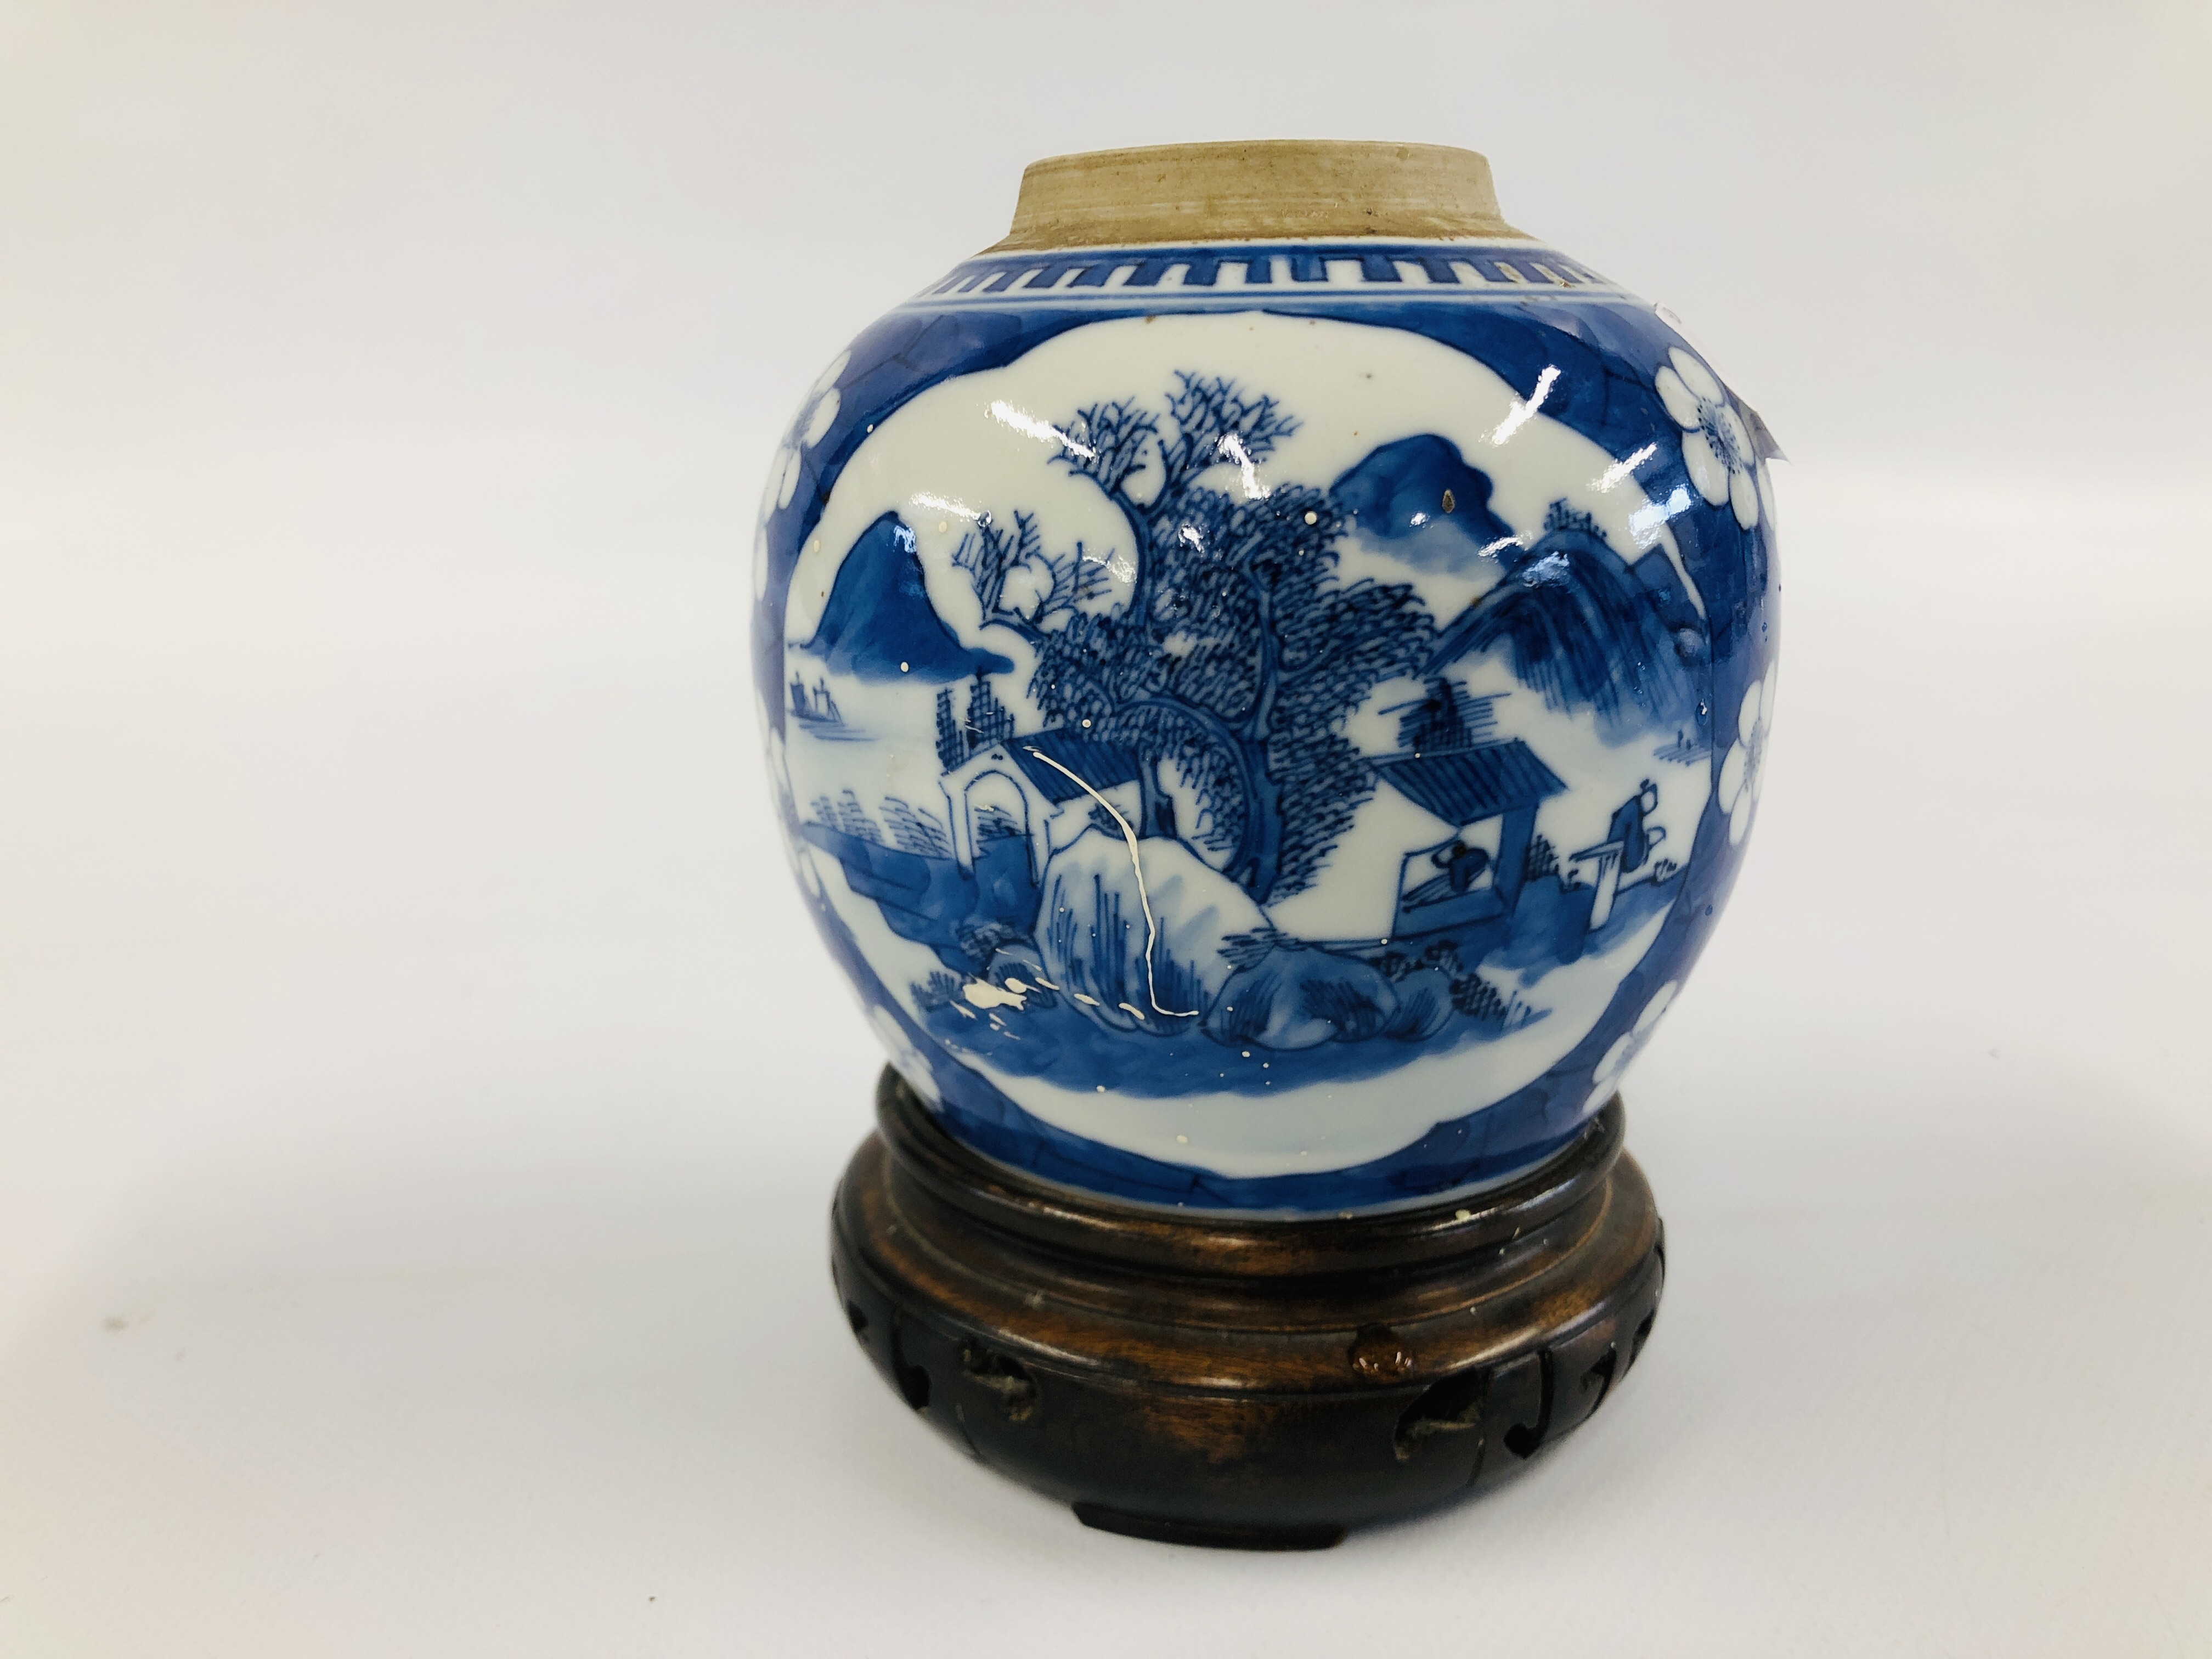 A ORIENTAL BLUE AND WHITE GINGER JAR AND STAND ALONG WITH A JAPANESE BUDDA FIGURE. - Image 7 of 10